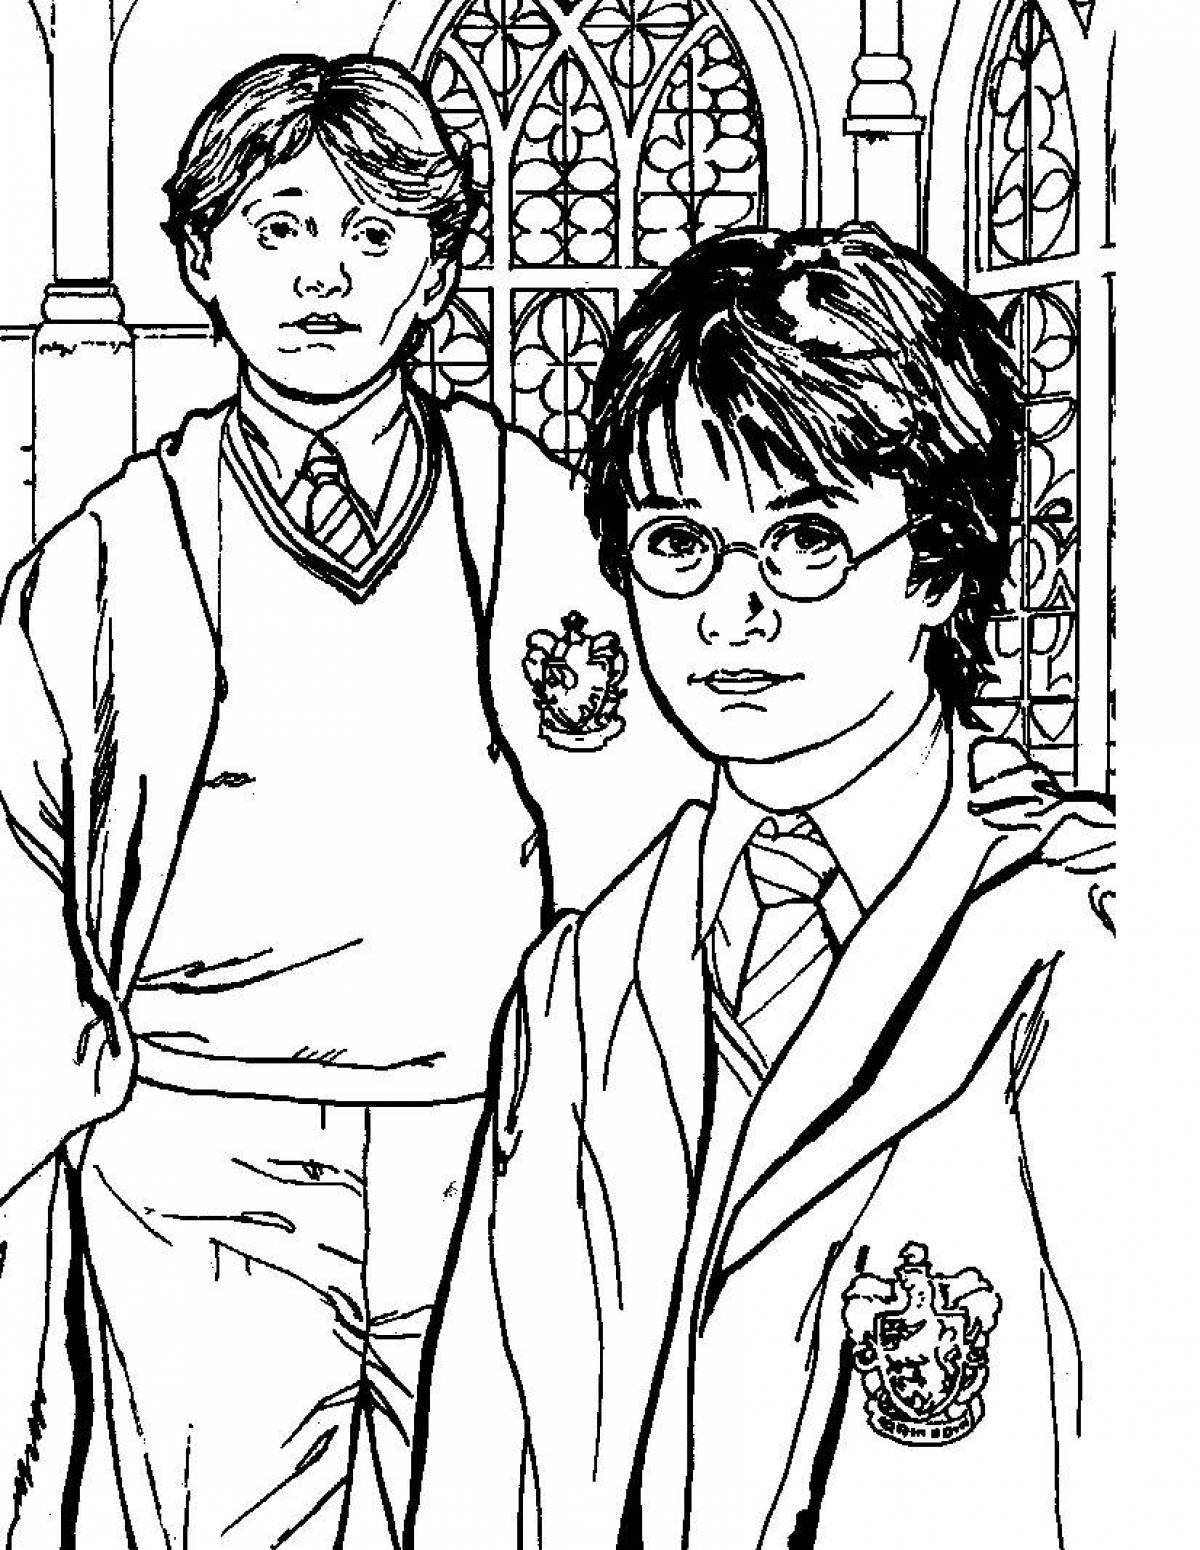 Harry potter humorous coloring book